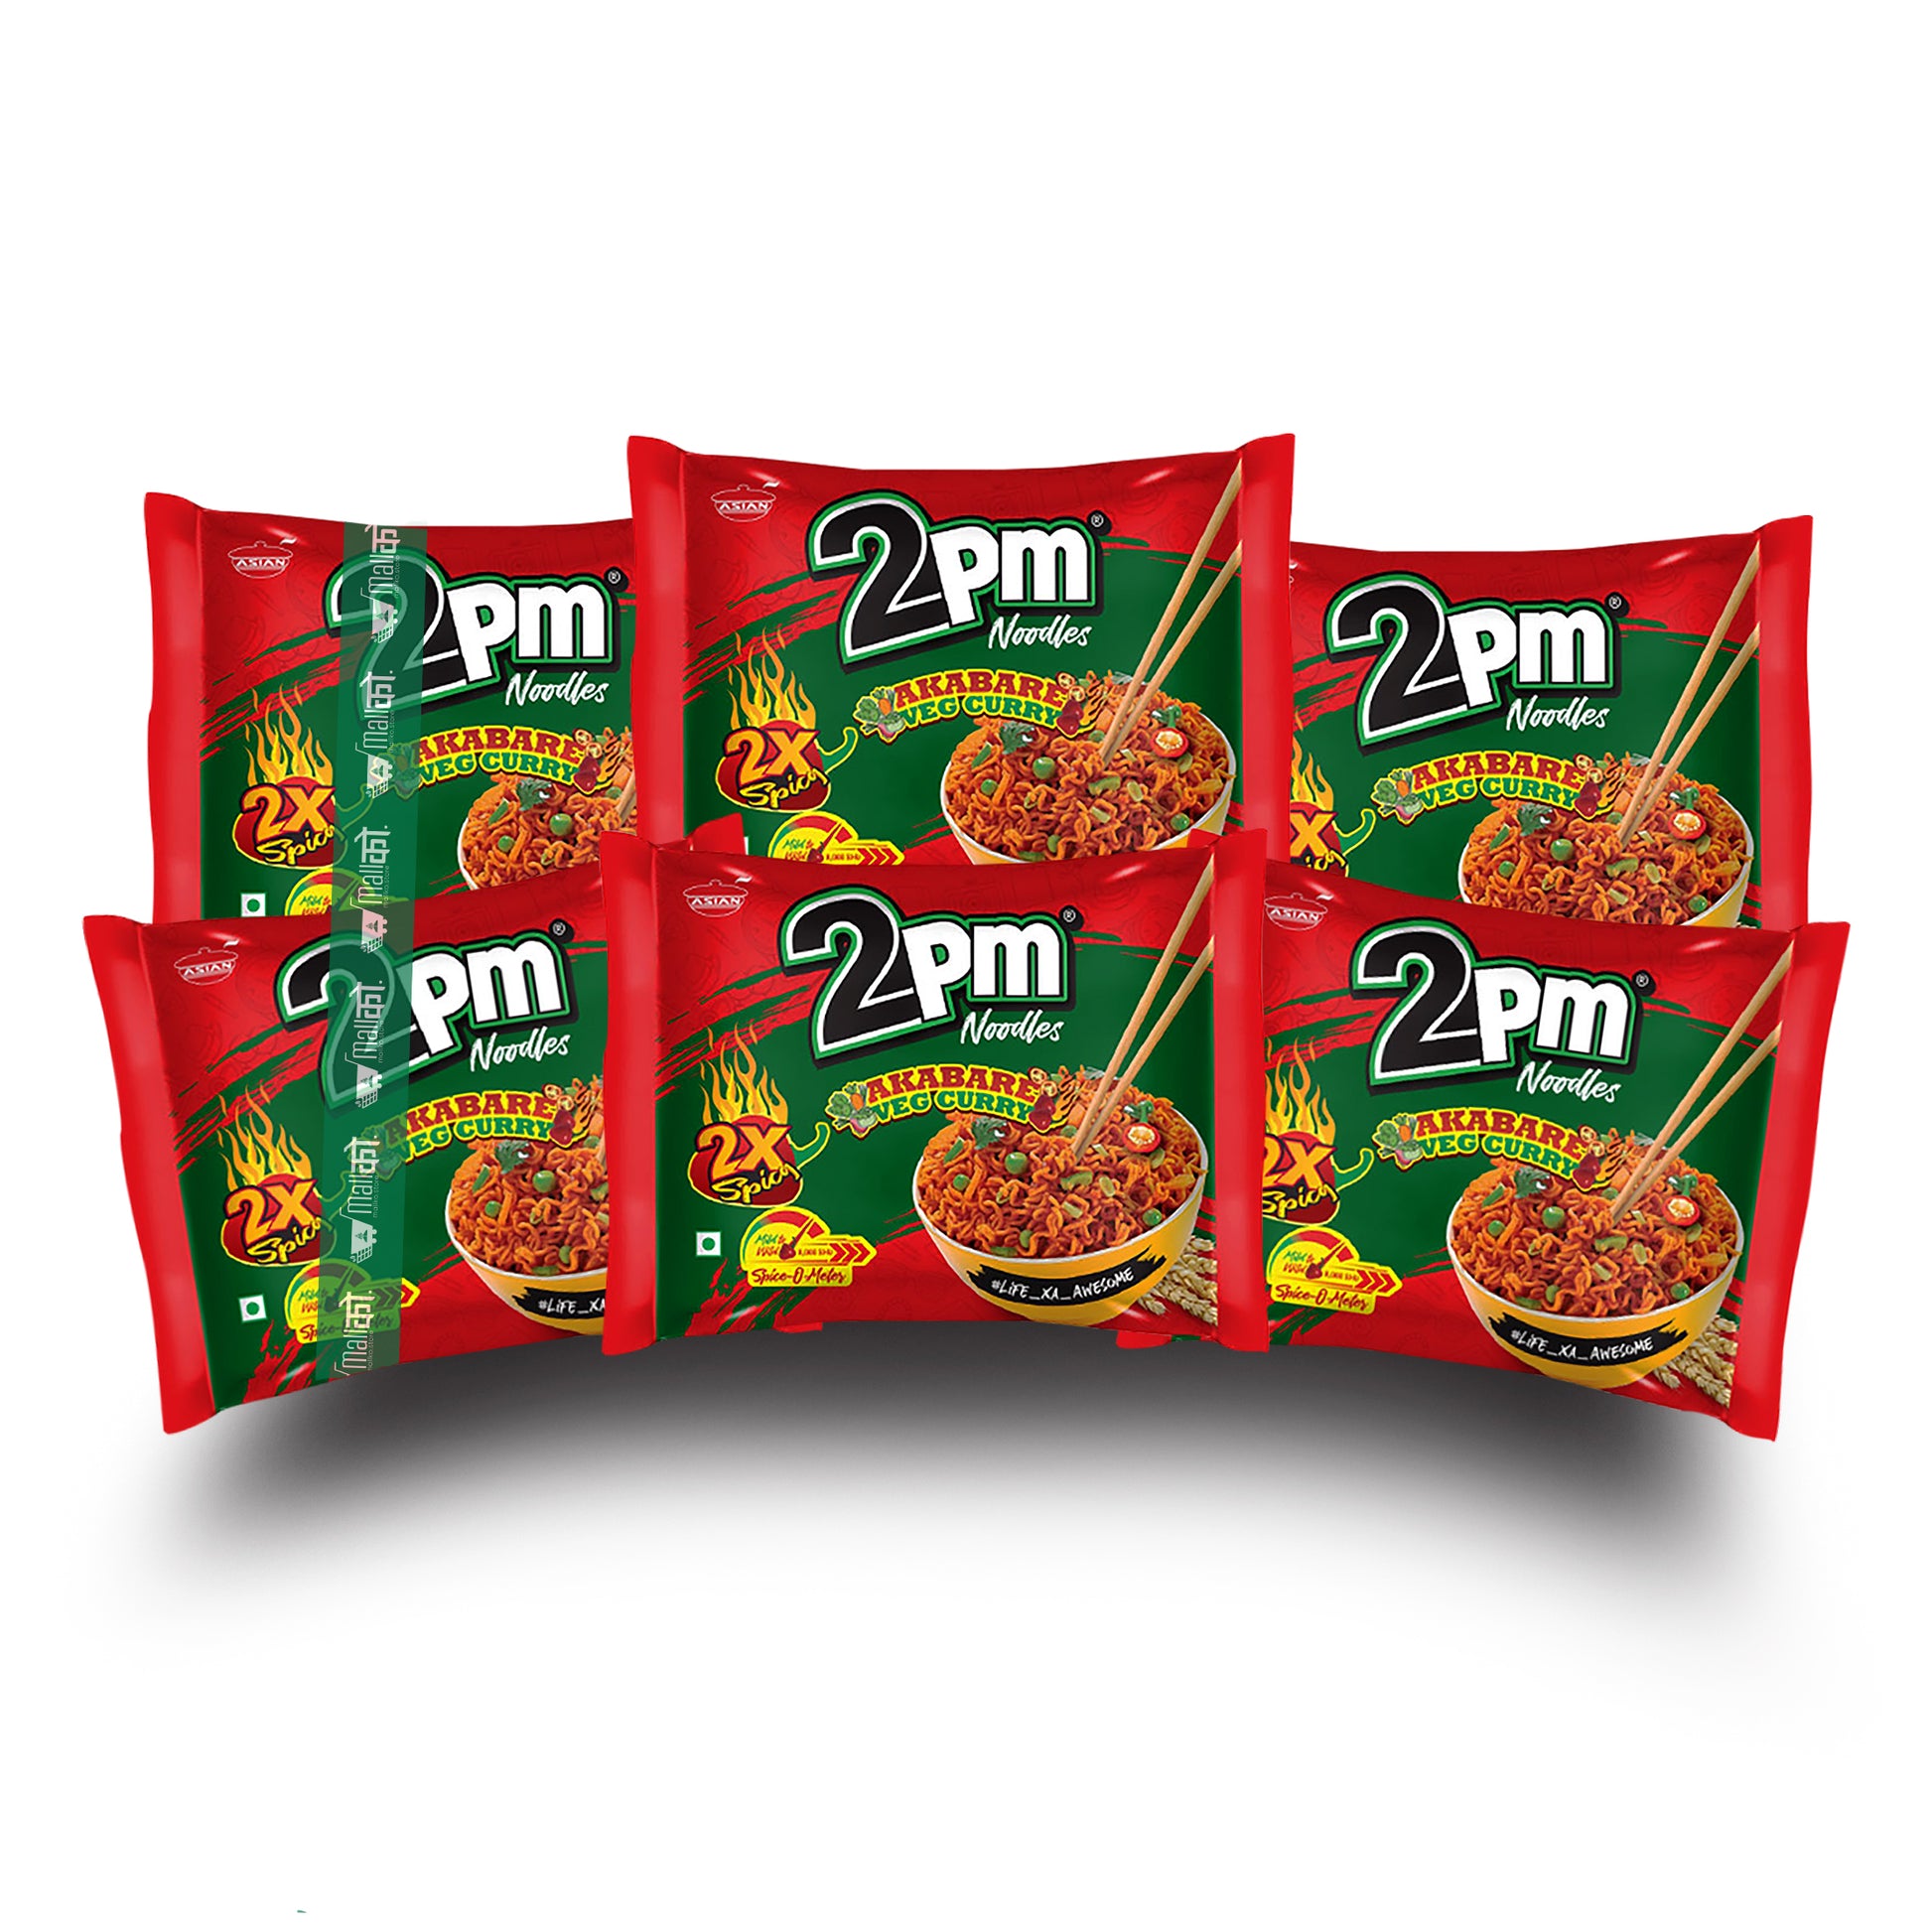 2 PM Akabre Veg Curry Noodles from Nepal